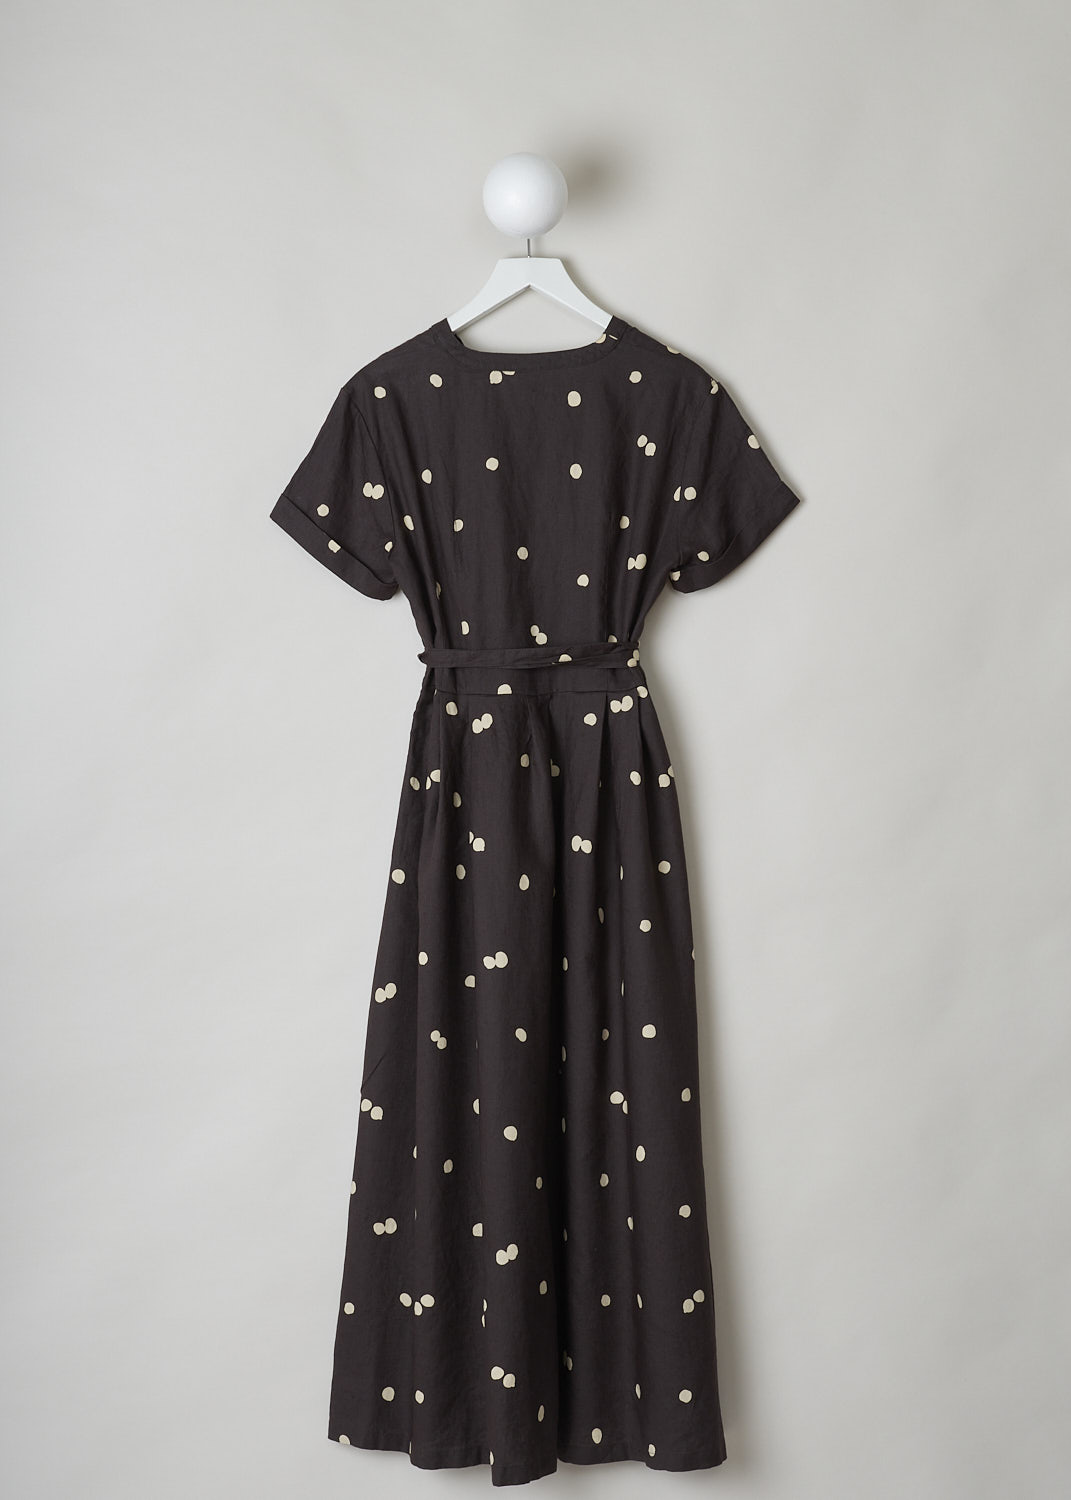 ASPESI, BROWN LINEN MAXI DRESS WITH DOTTED PRINT, 2958_M277_62331, Brown, Print, Back, This chocolate brown linen dress has a off-white dotted print throughout. The dress has a modest V-neckline and w three-button closure in the front. The dress has short sleeves with rolled cuffs. An attached belt can be used to cinch in the waist. A concealed side zip functions as the closure option. Slanted pockets re concealed in the side seam. The dress has a straight hemline.
